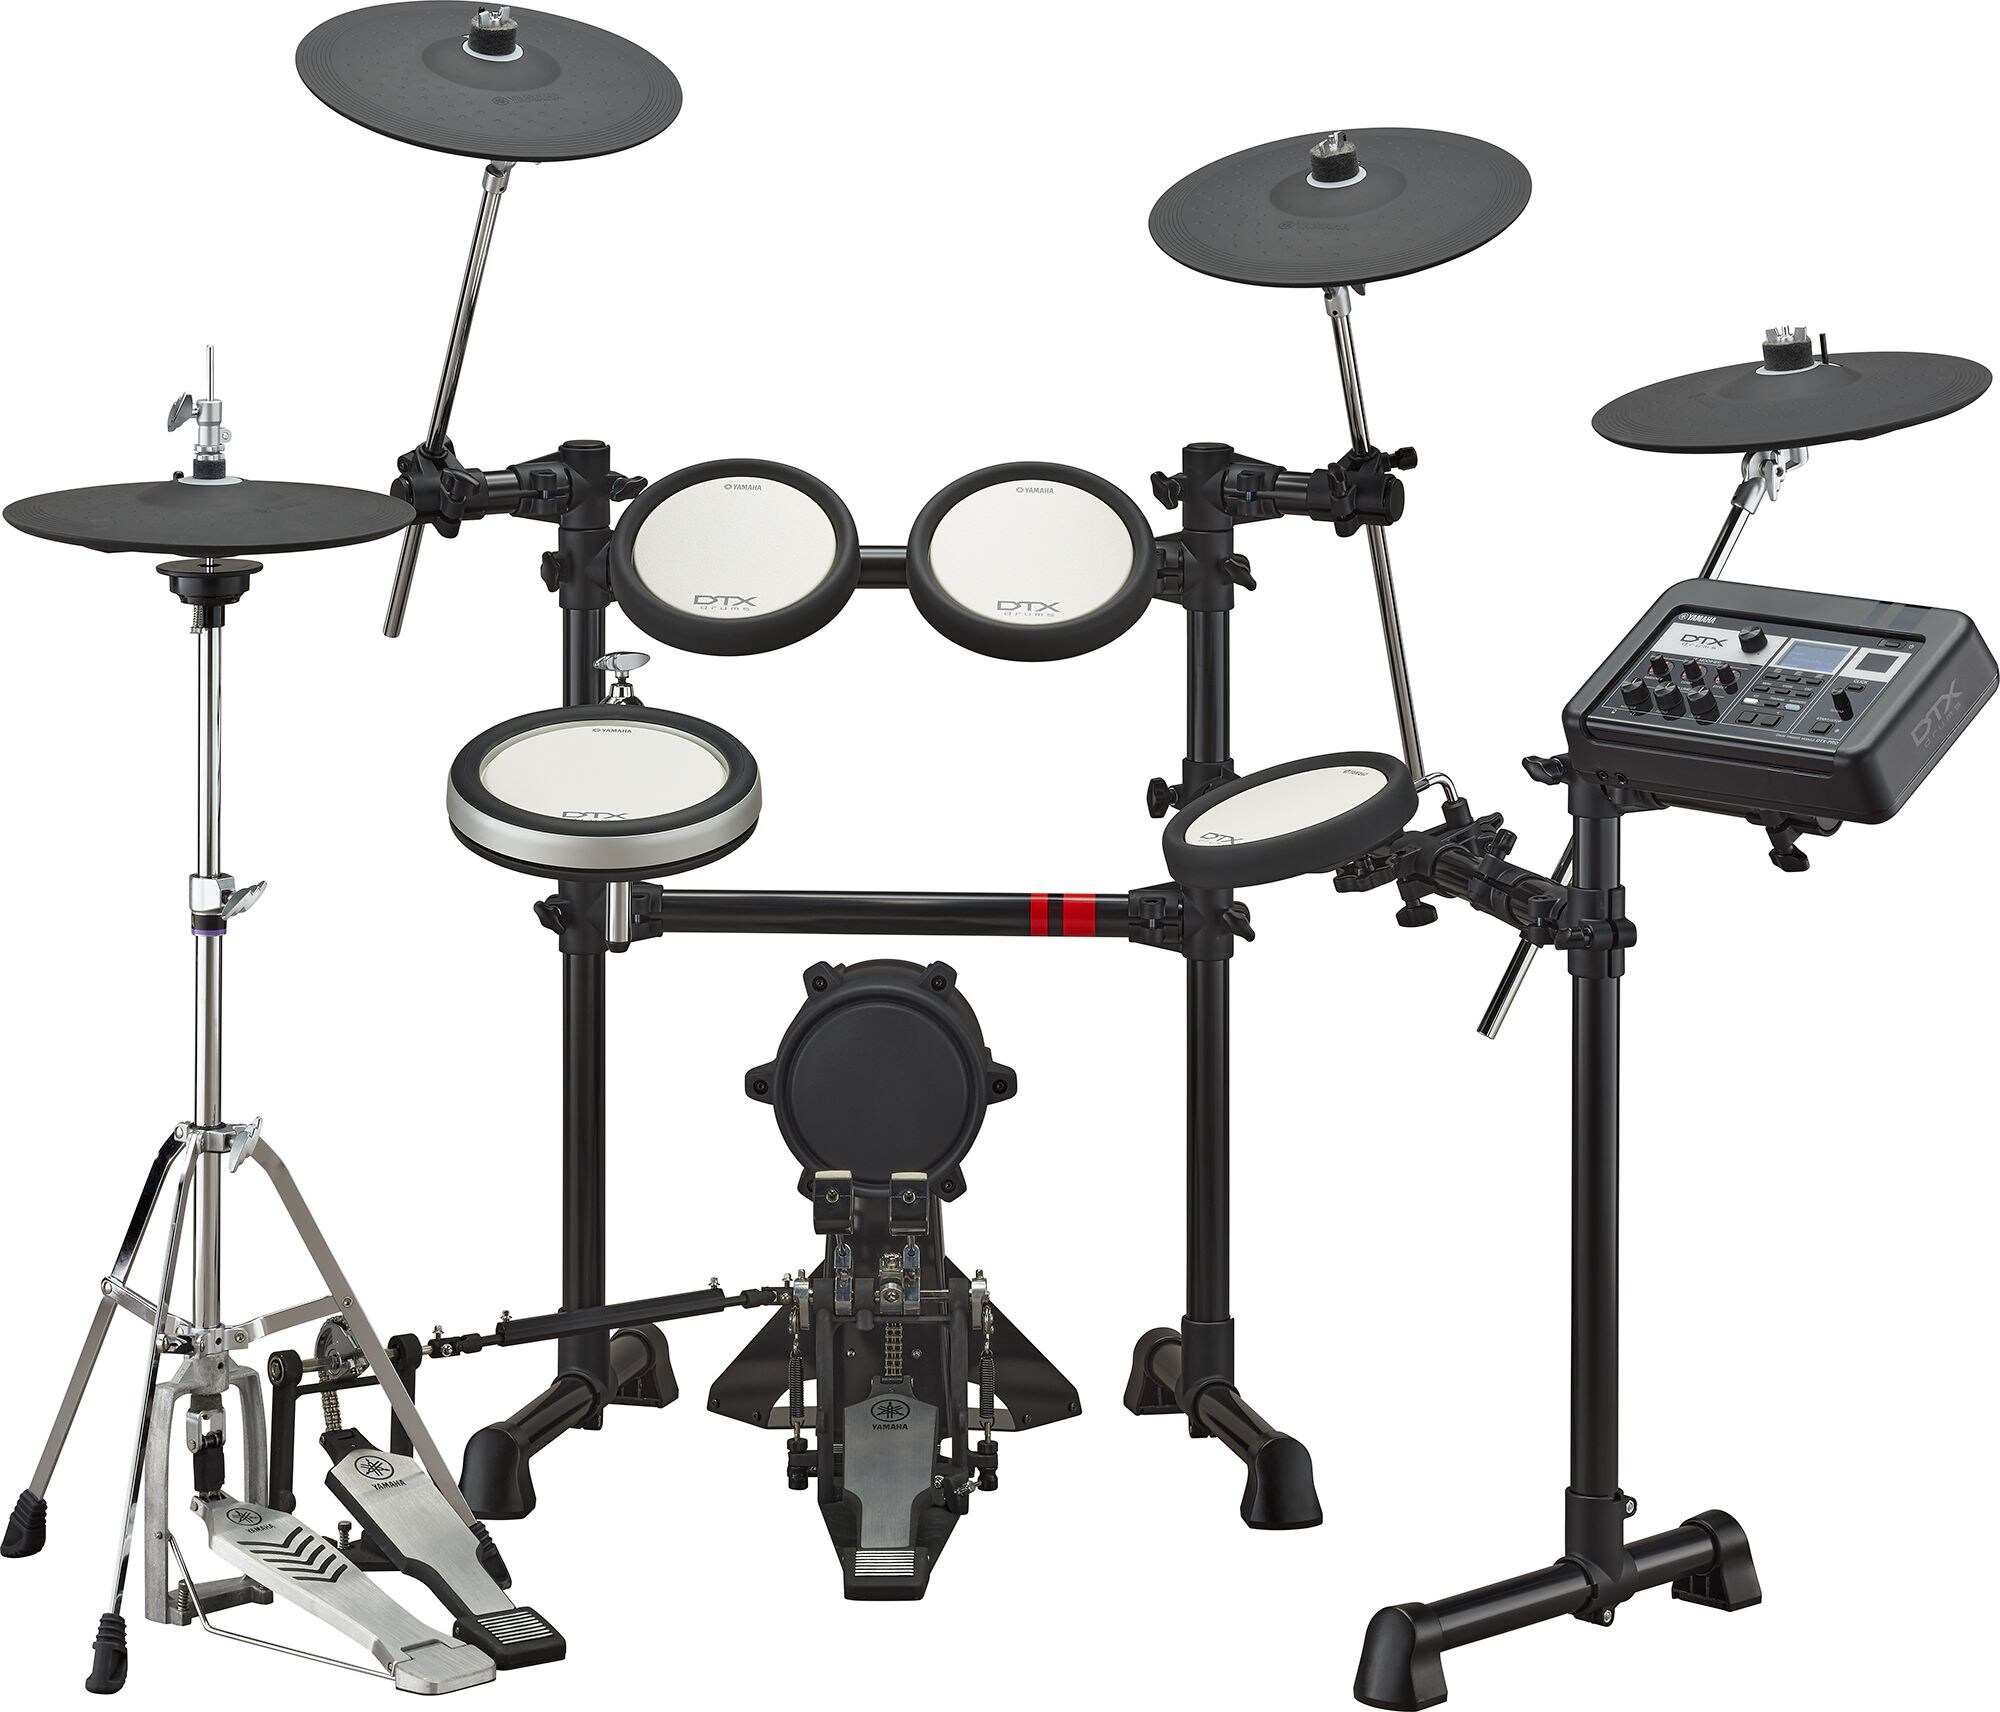 - Drums CIS Yamaha - Drums Products - Musical Middle - / Kits Series / / East Drum Electronic / Instruments Asia - Oceania / - Electronic - Latin Africa DTX6 America Products -